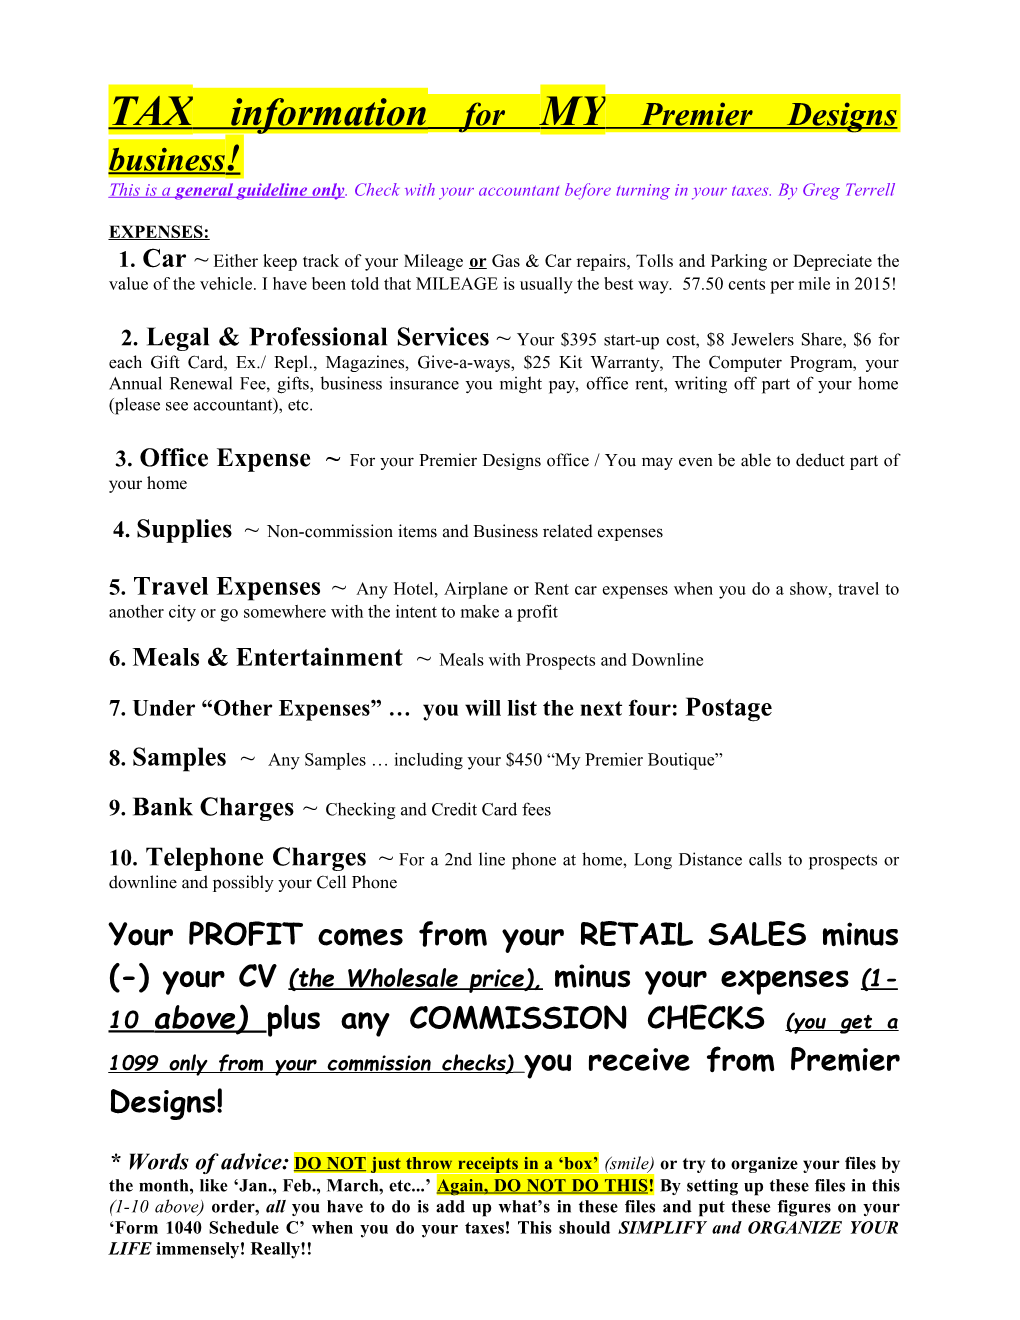 TAX Information for MY Premier Designs Business!